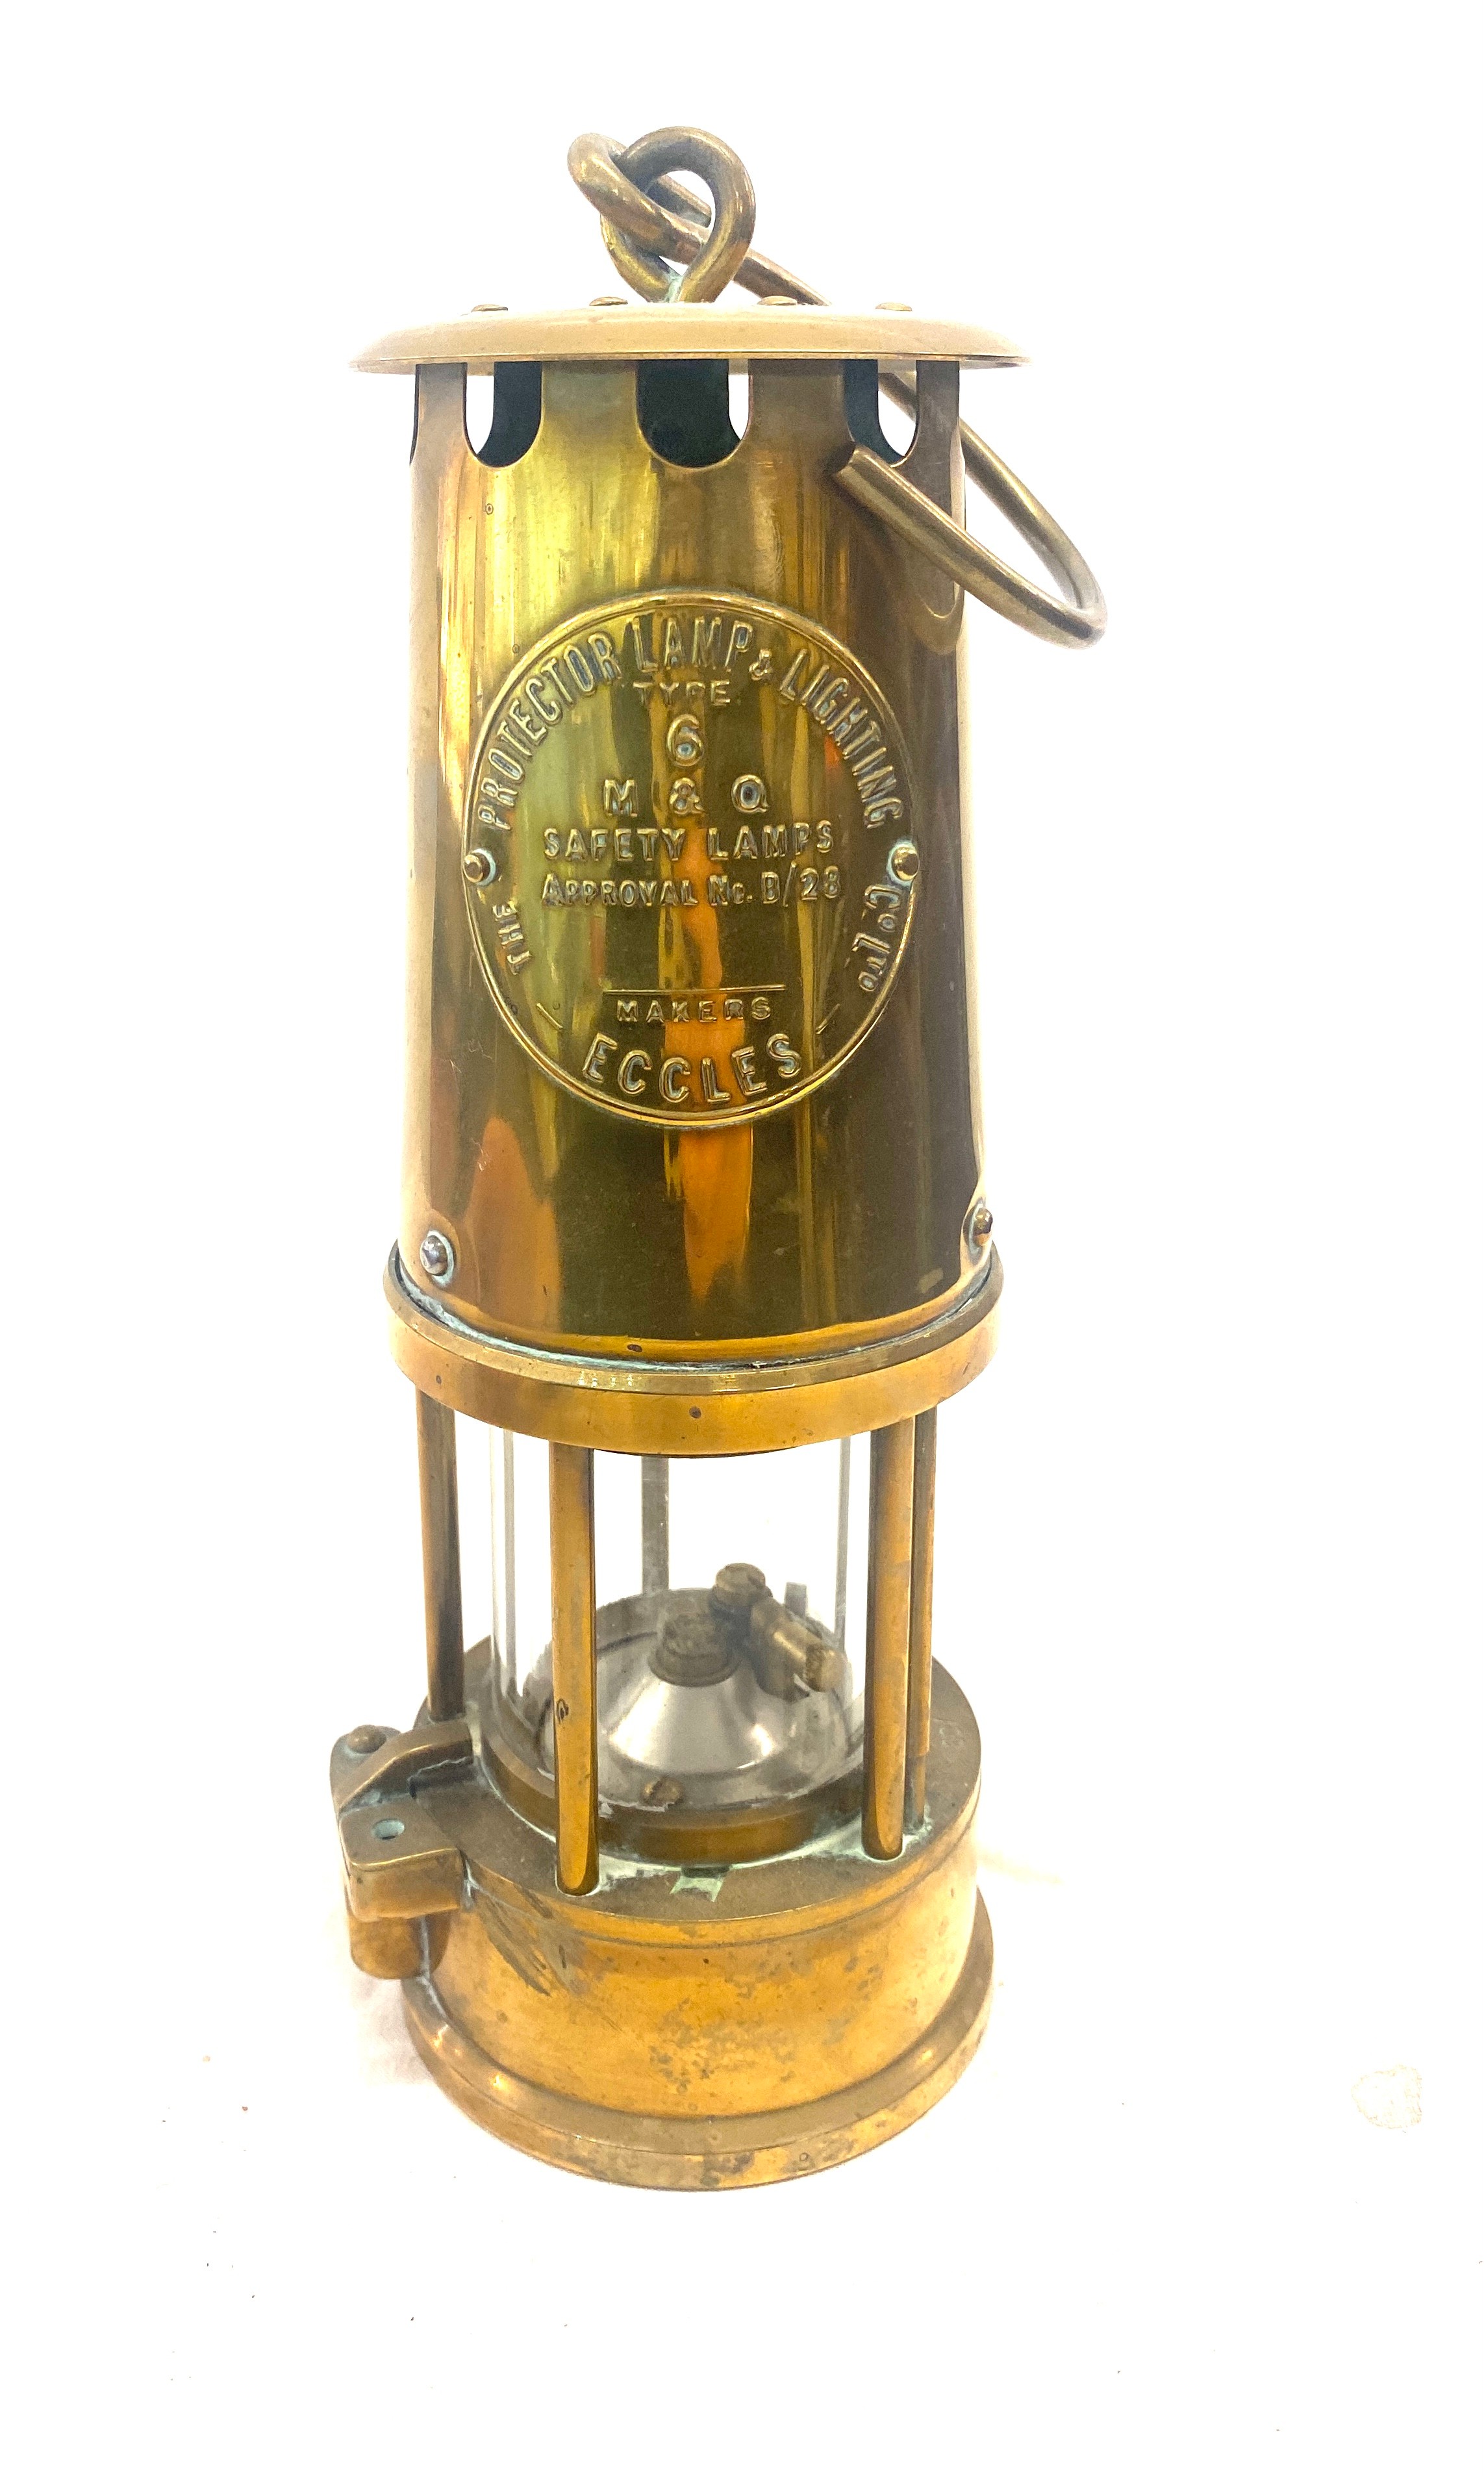 Brass miners lamp, Maker Eccles, overall height: 10 inches